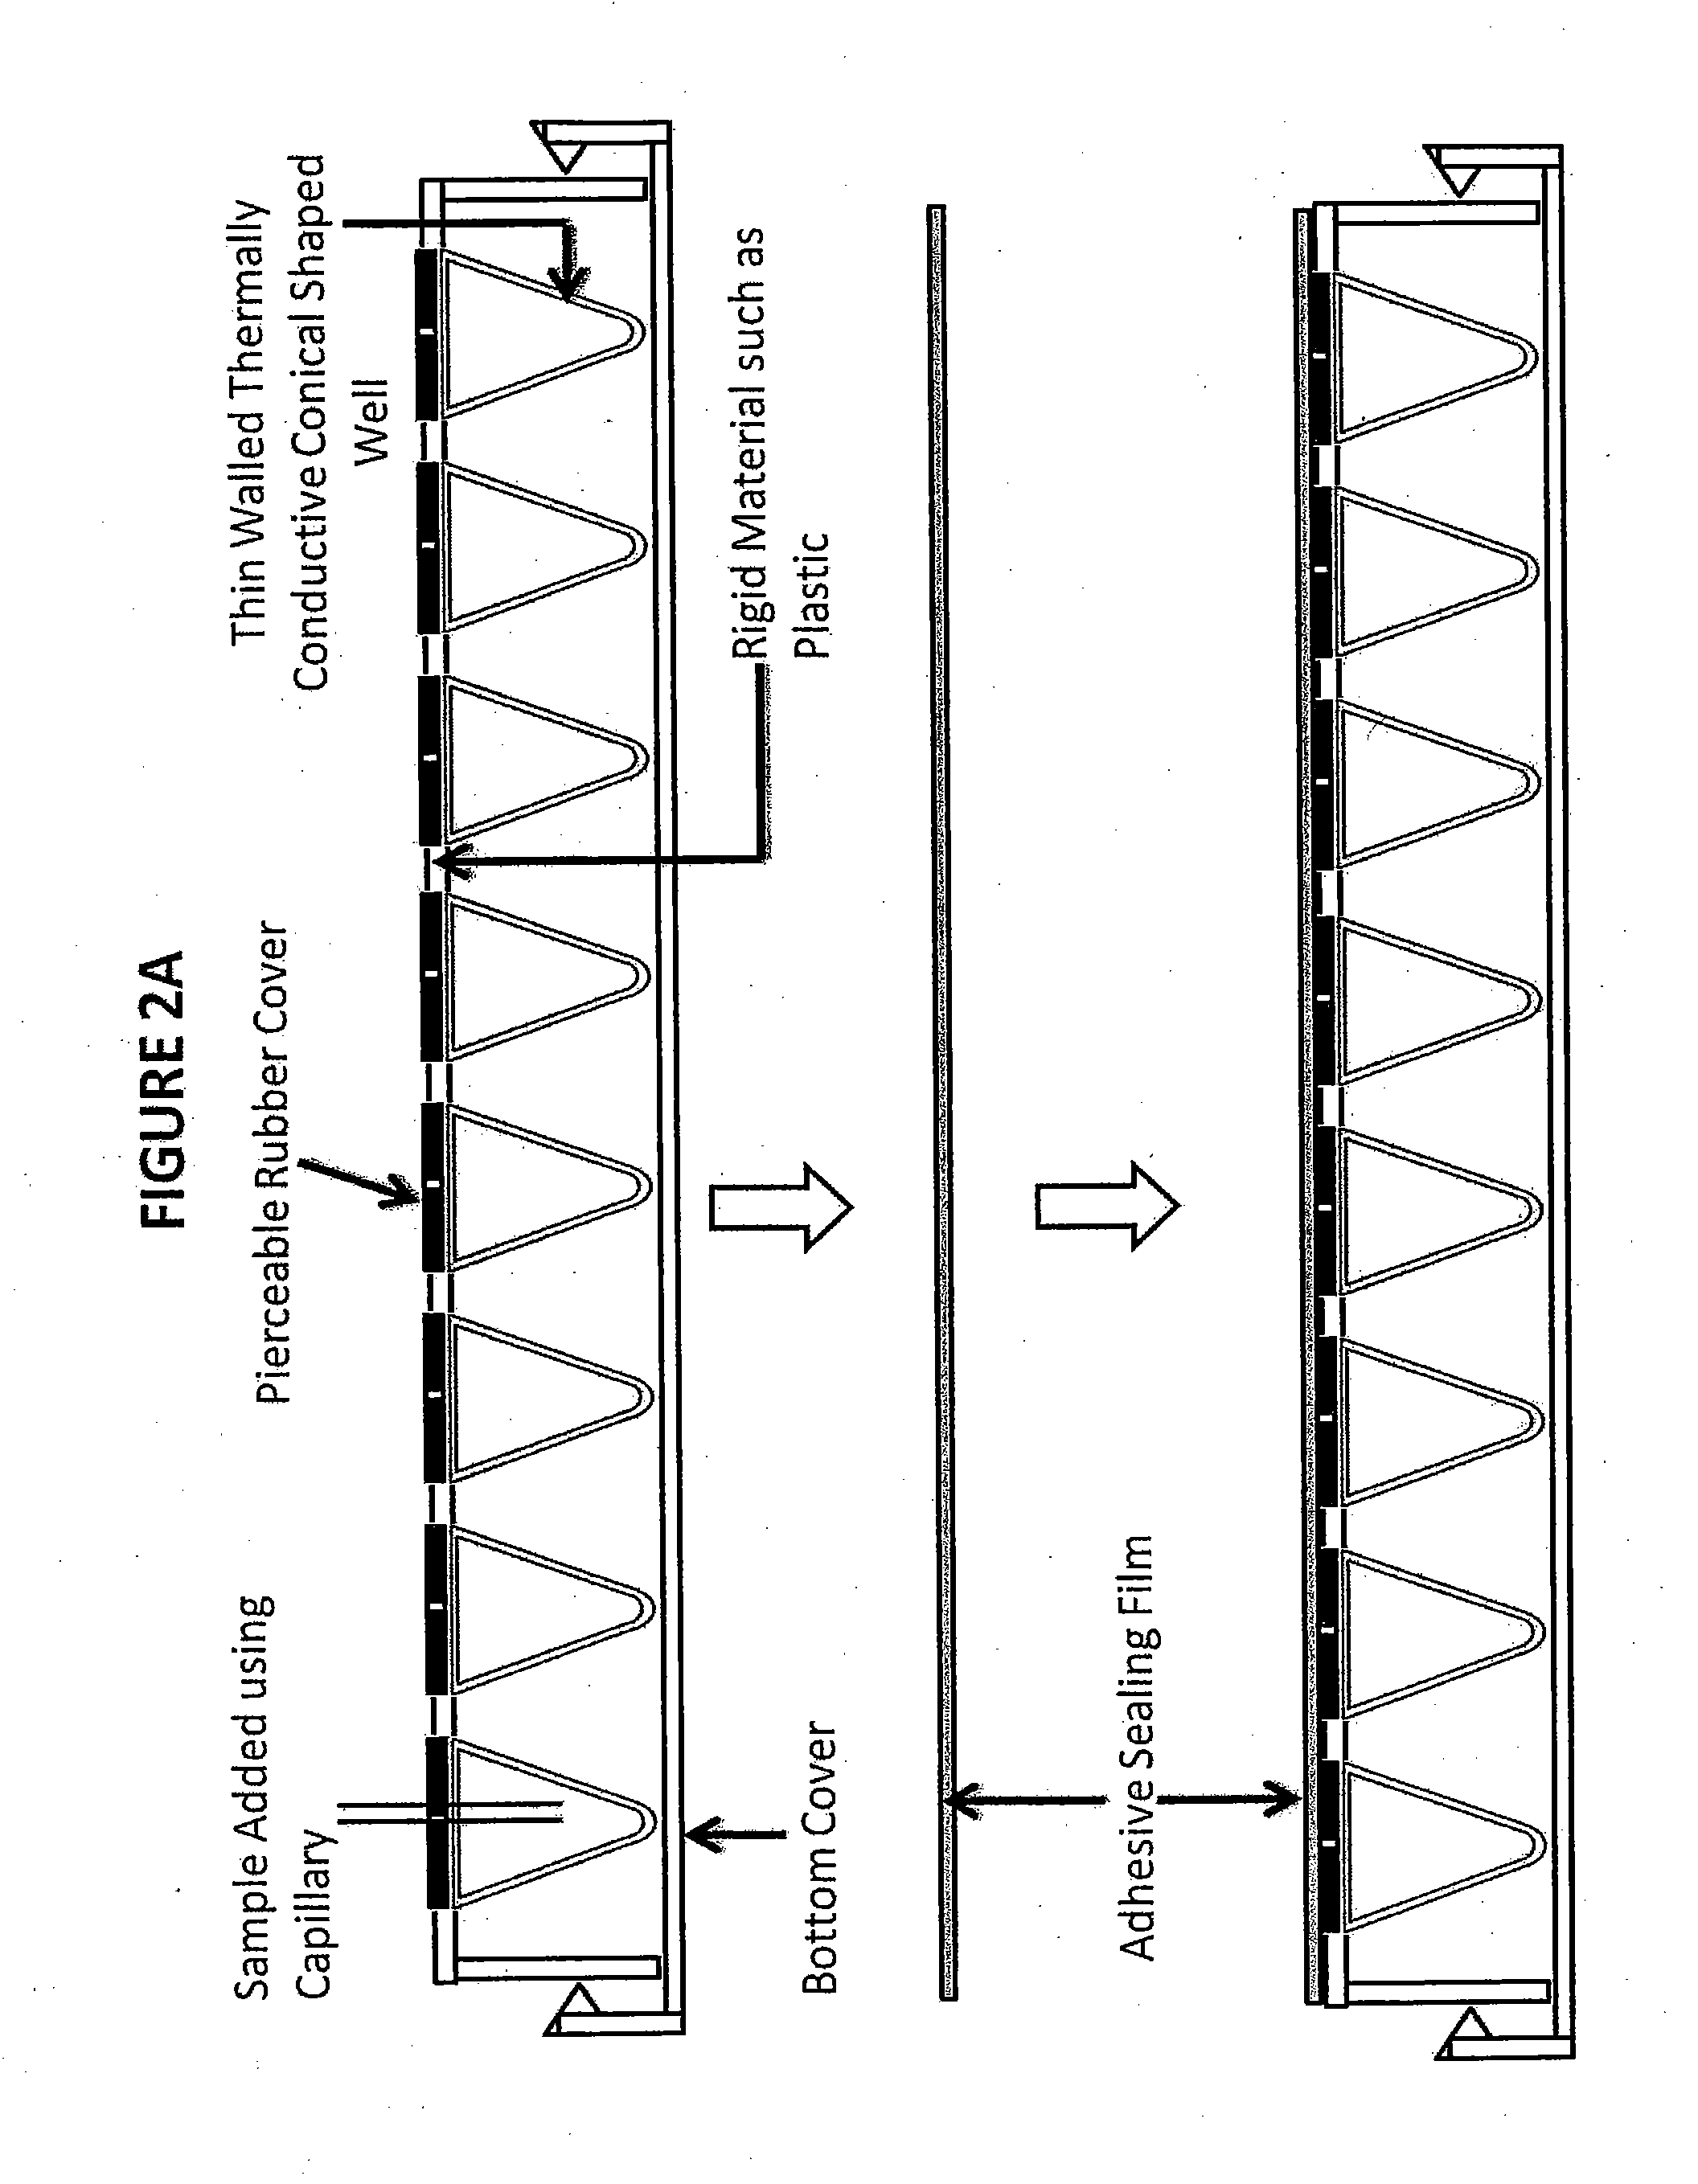 Methods and devices for collecting samples in a high throughput format